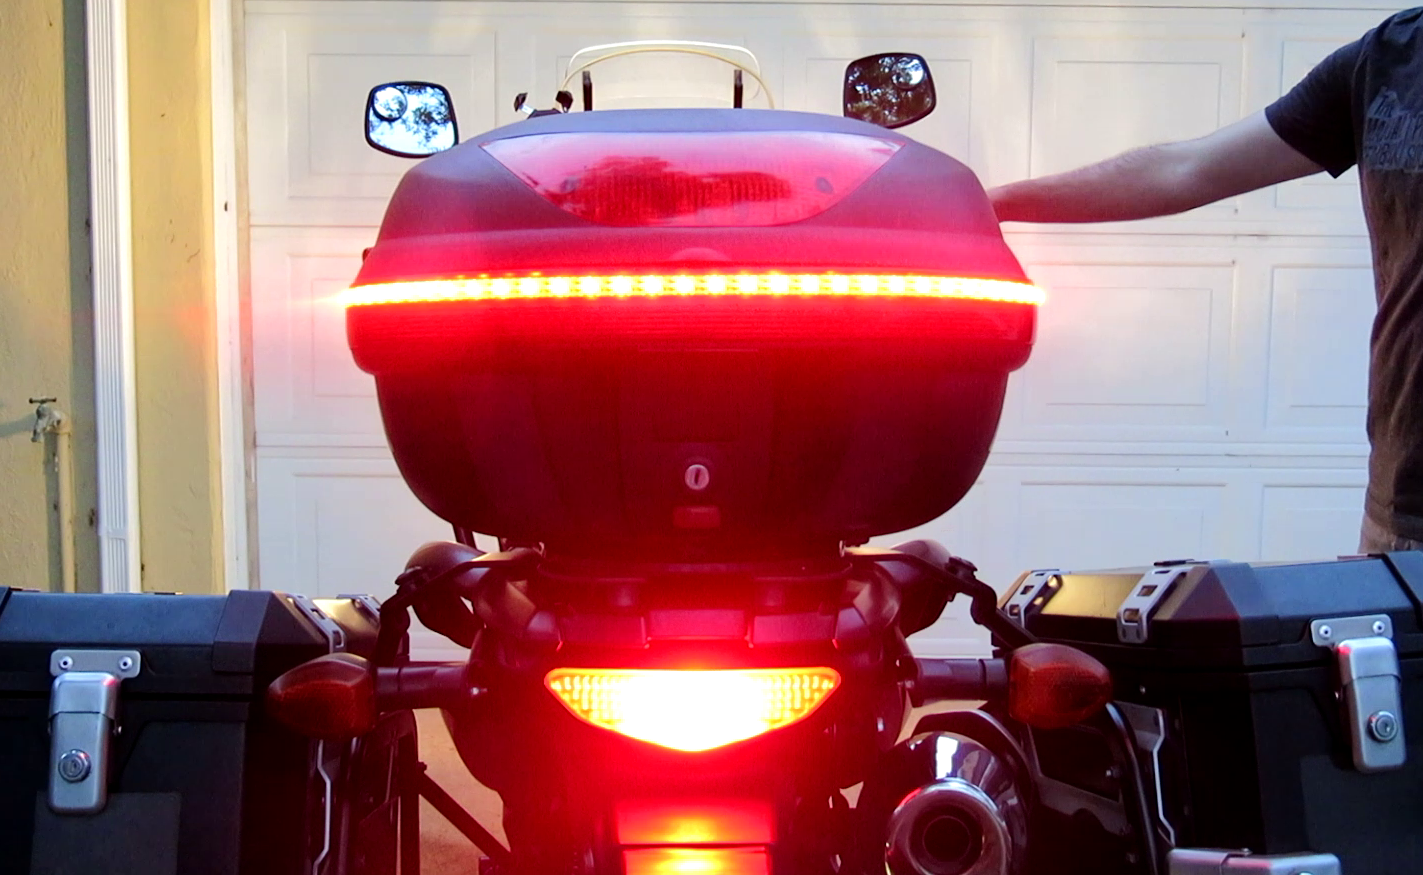 Rear view of motorcycle with brake lights illuminated